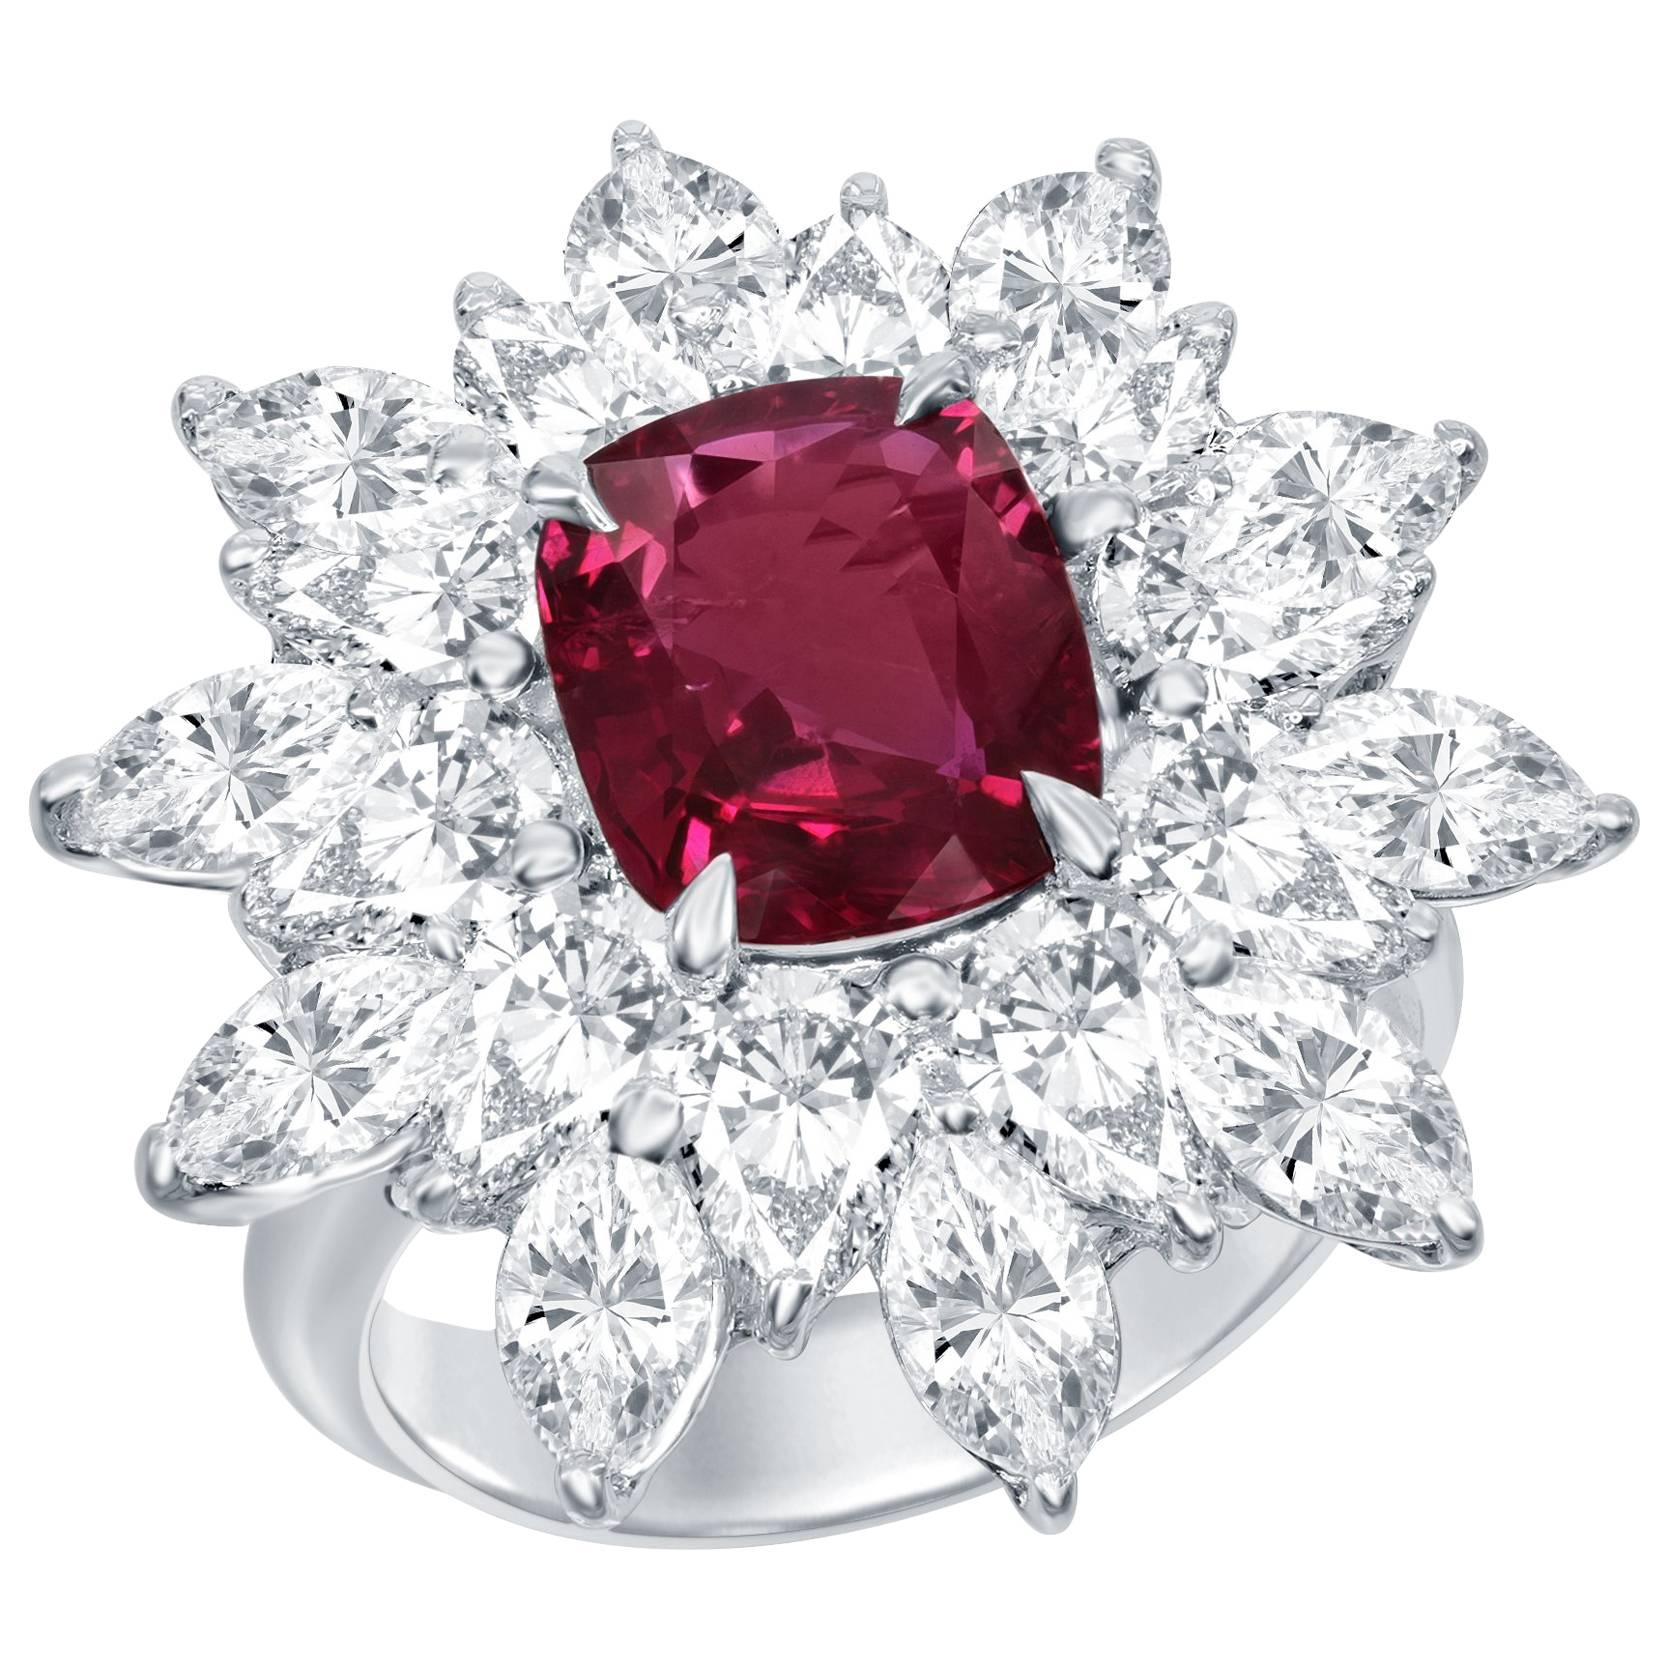 GRS Certified 2.76 Carat Red Ruby Diamond Platinum Cocktail Ring